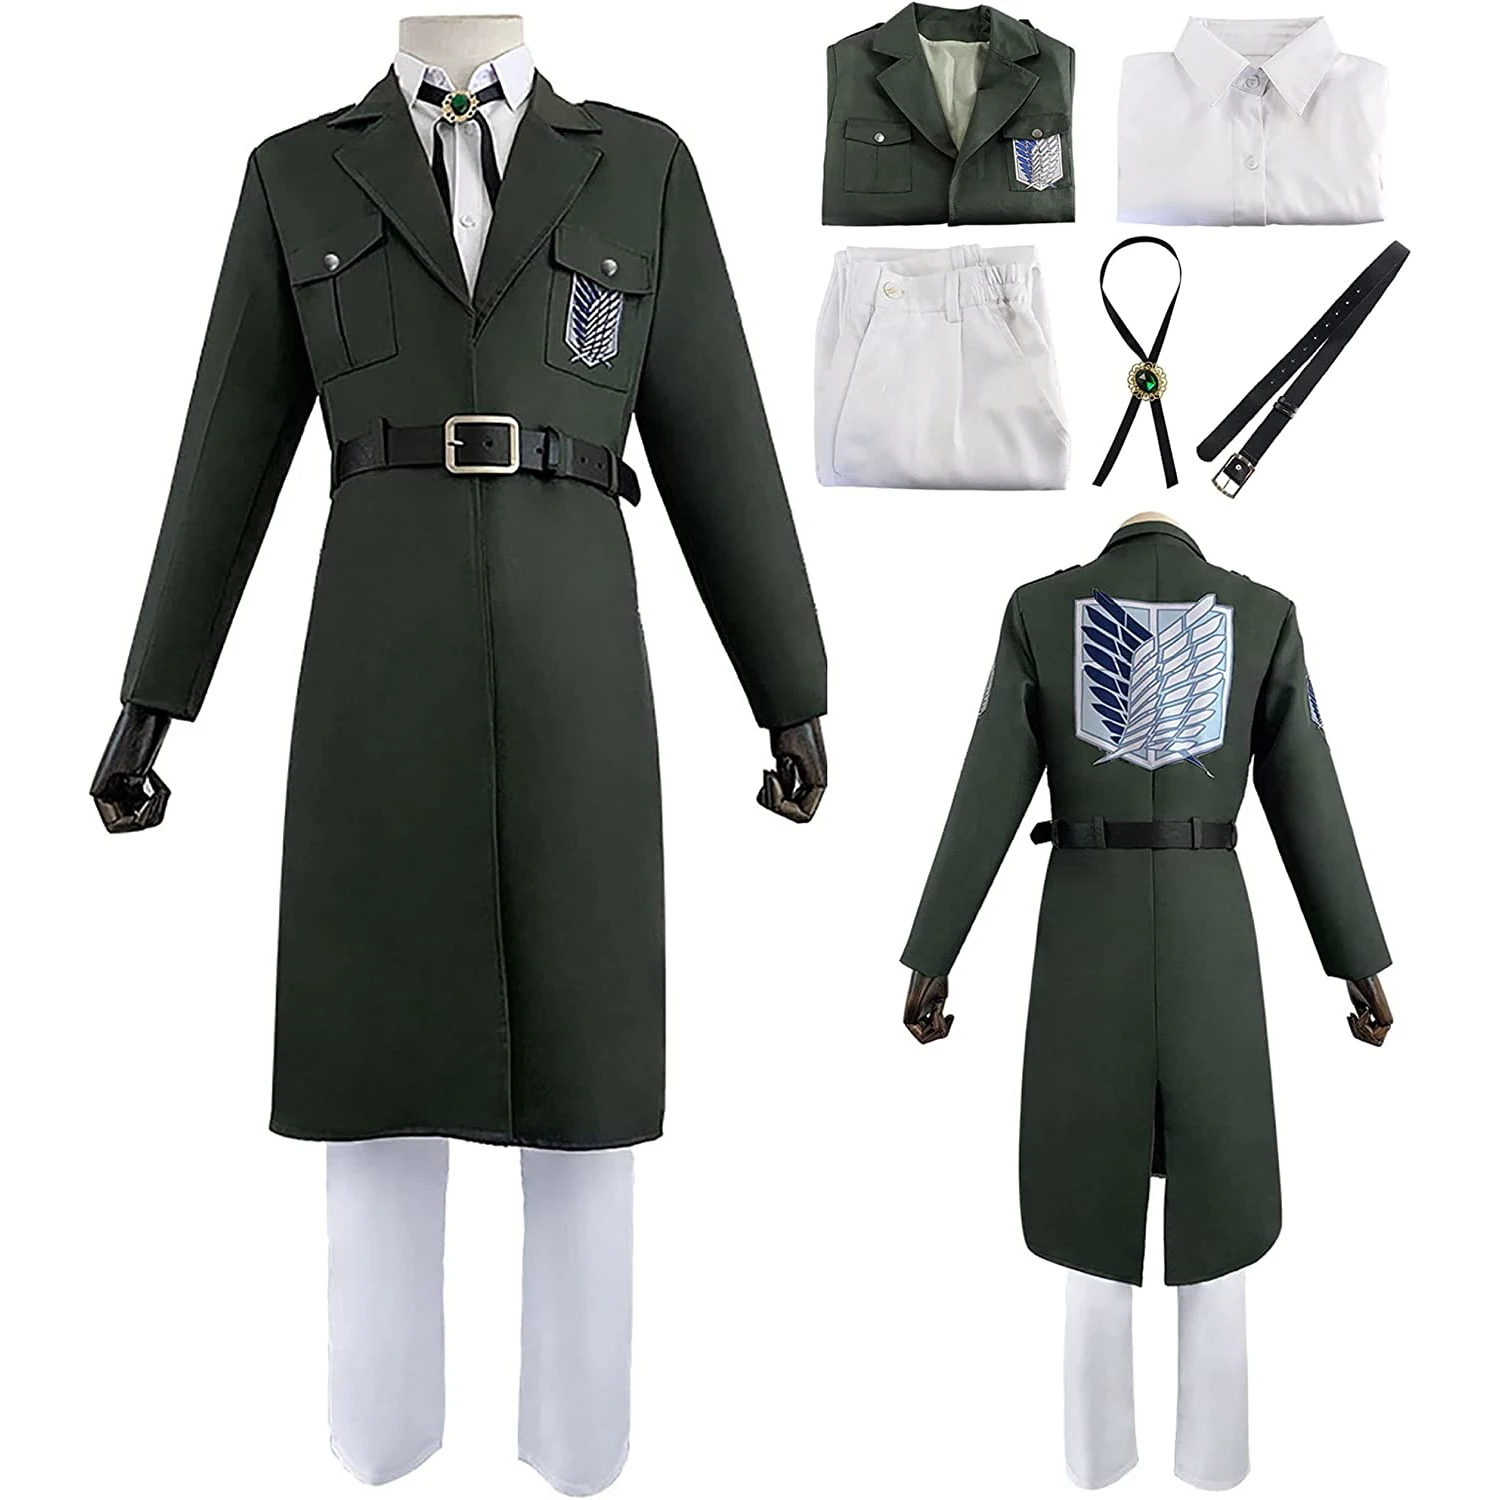 

Anime AOT Attack On Titan Cosplay Costume Scout Legion Corps Uniform Allen Army Green Long Soldier Coat Adult Halloween Party